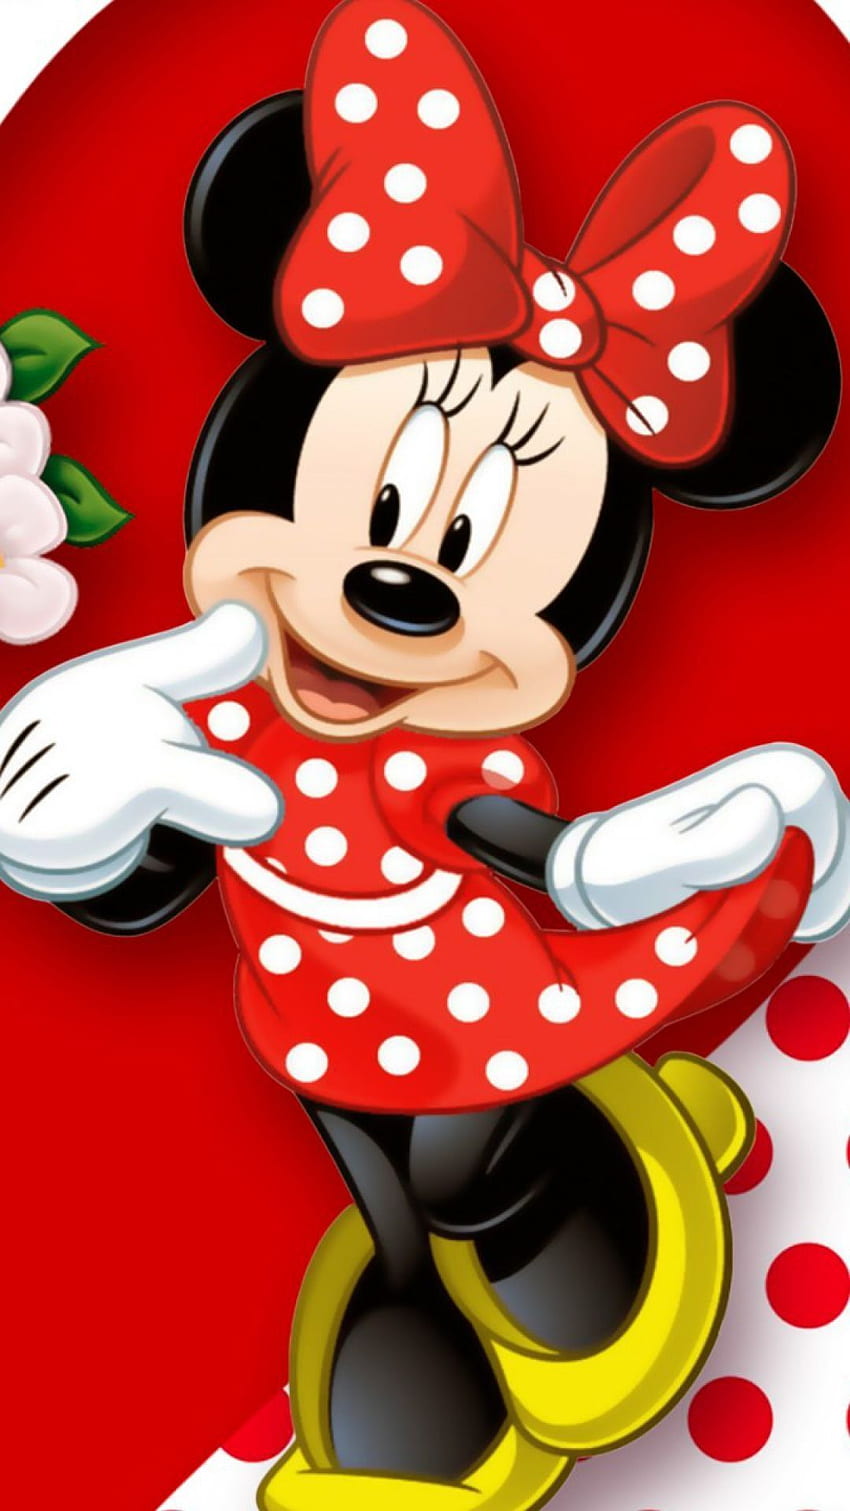 Character Disney Minnie Mouse. Disney Minnie Mouse Bow Tique HD phone wallpaper